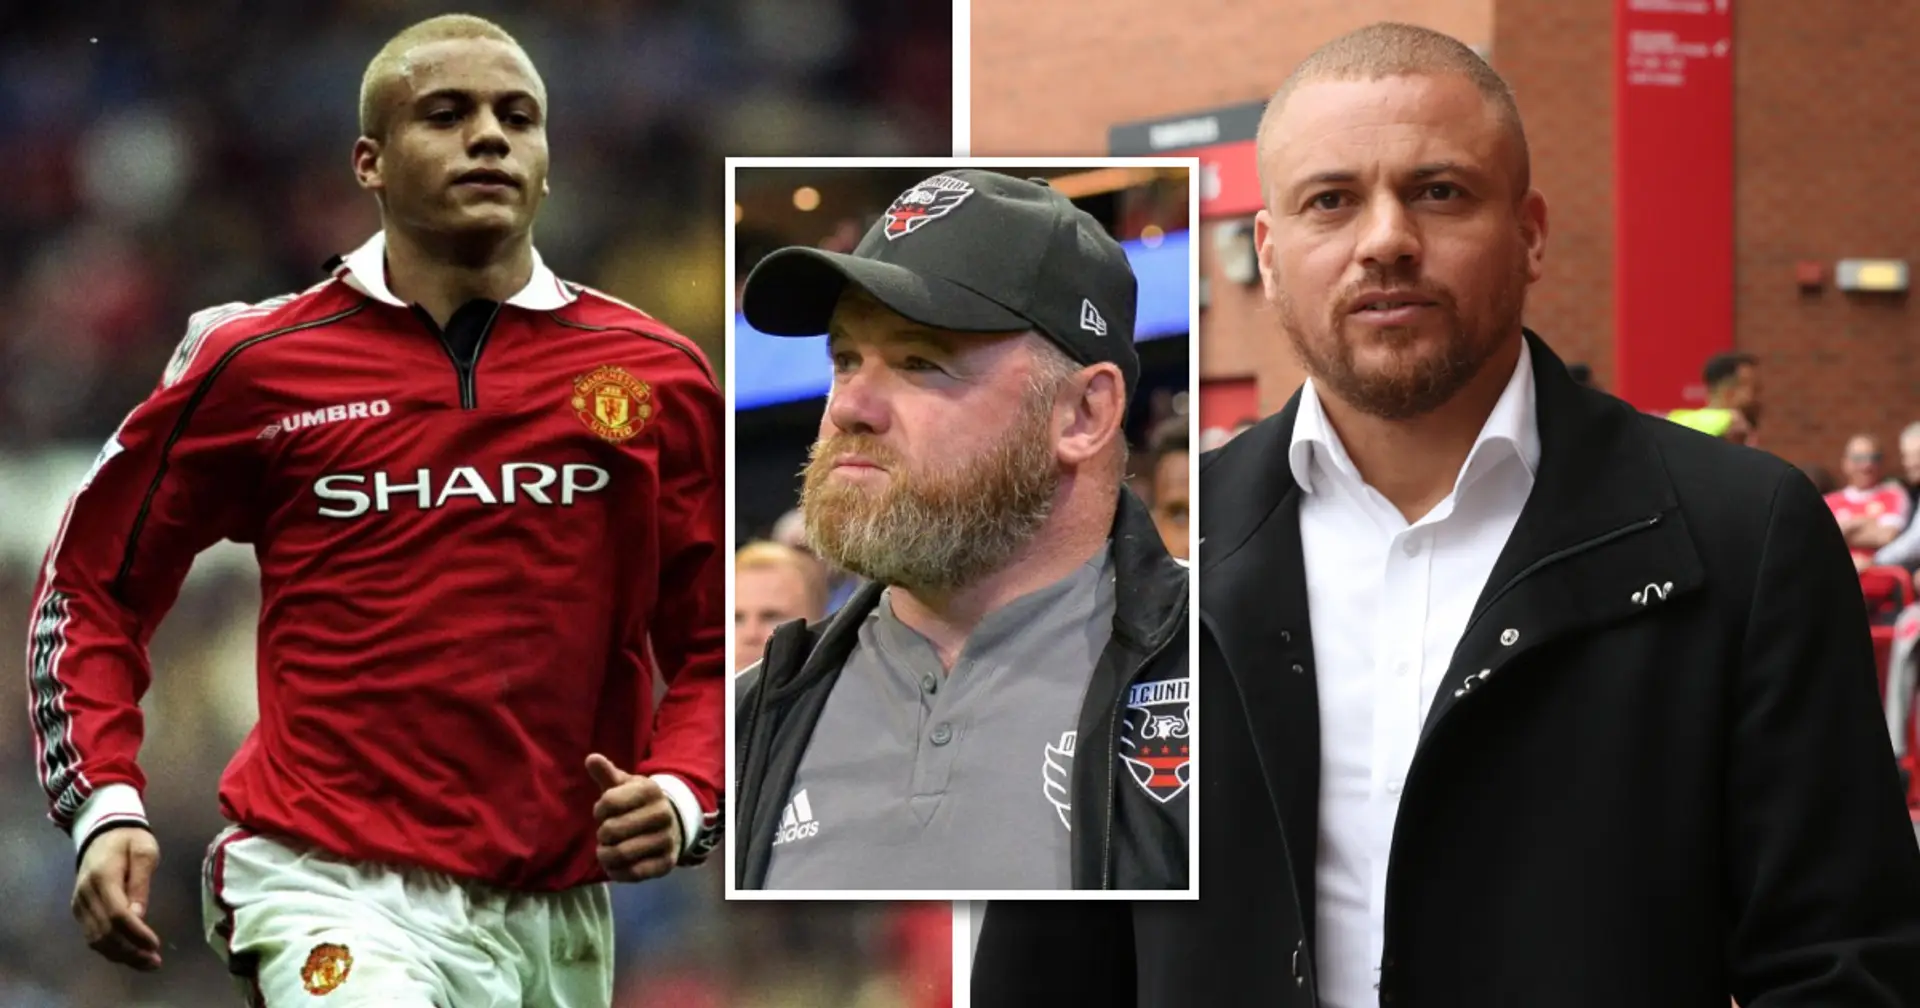 The ex-Red Devils star is bankrupt and rents a small property from current Man United player